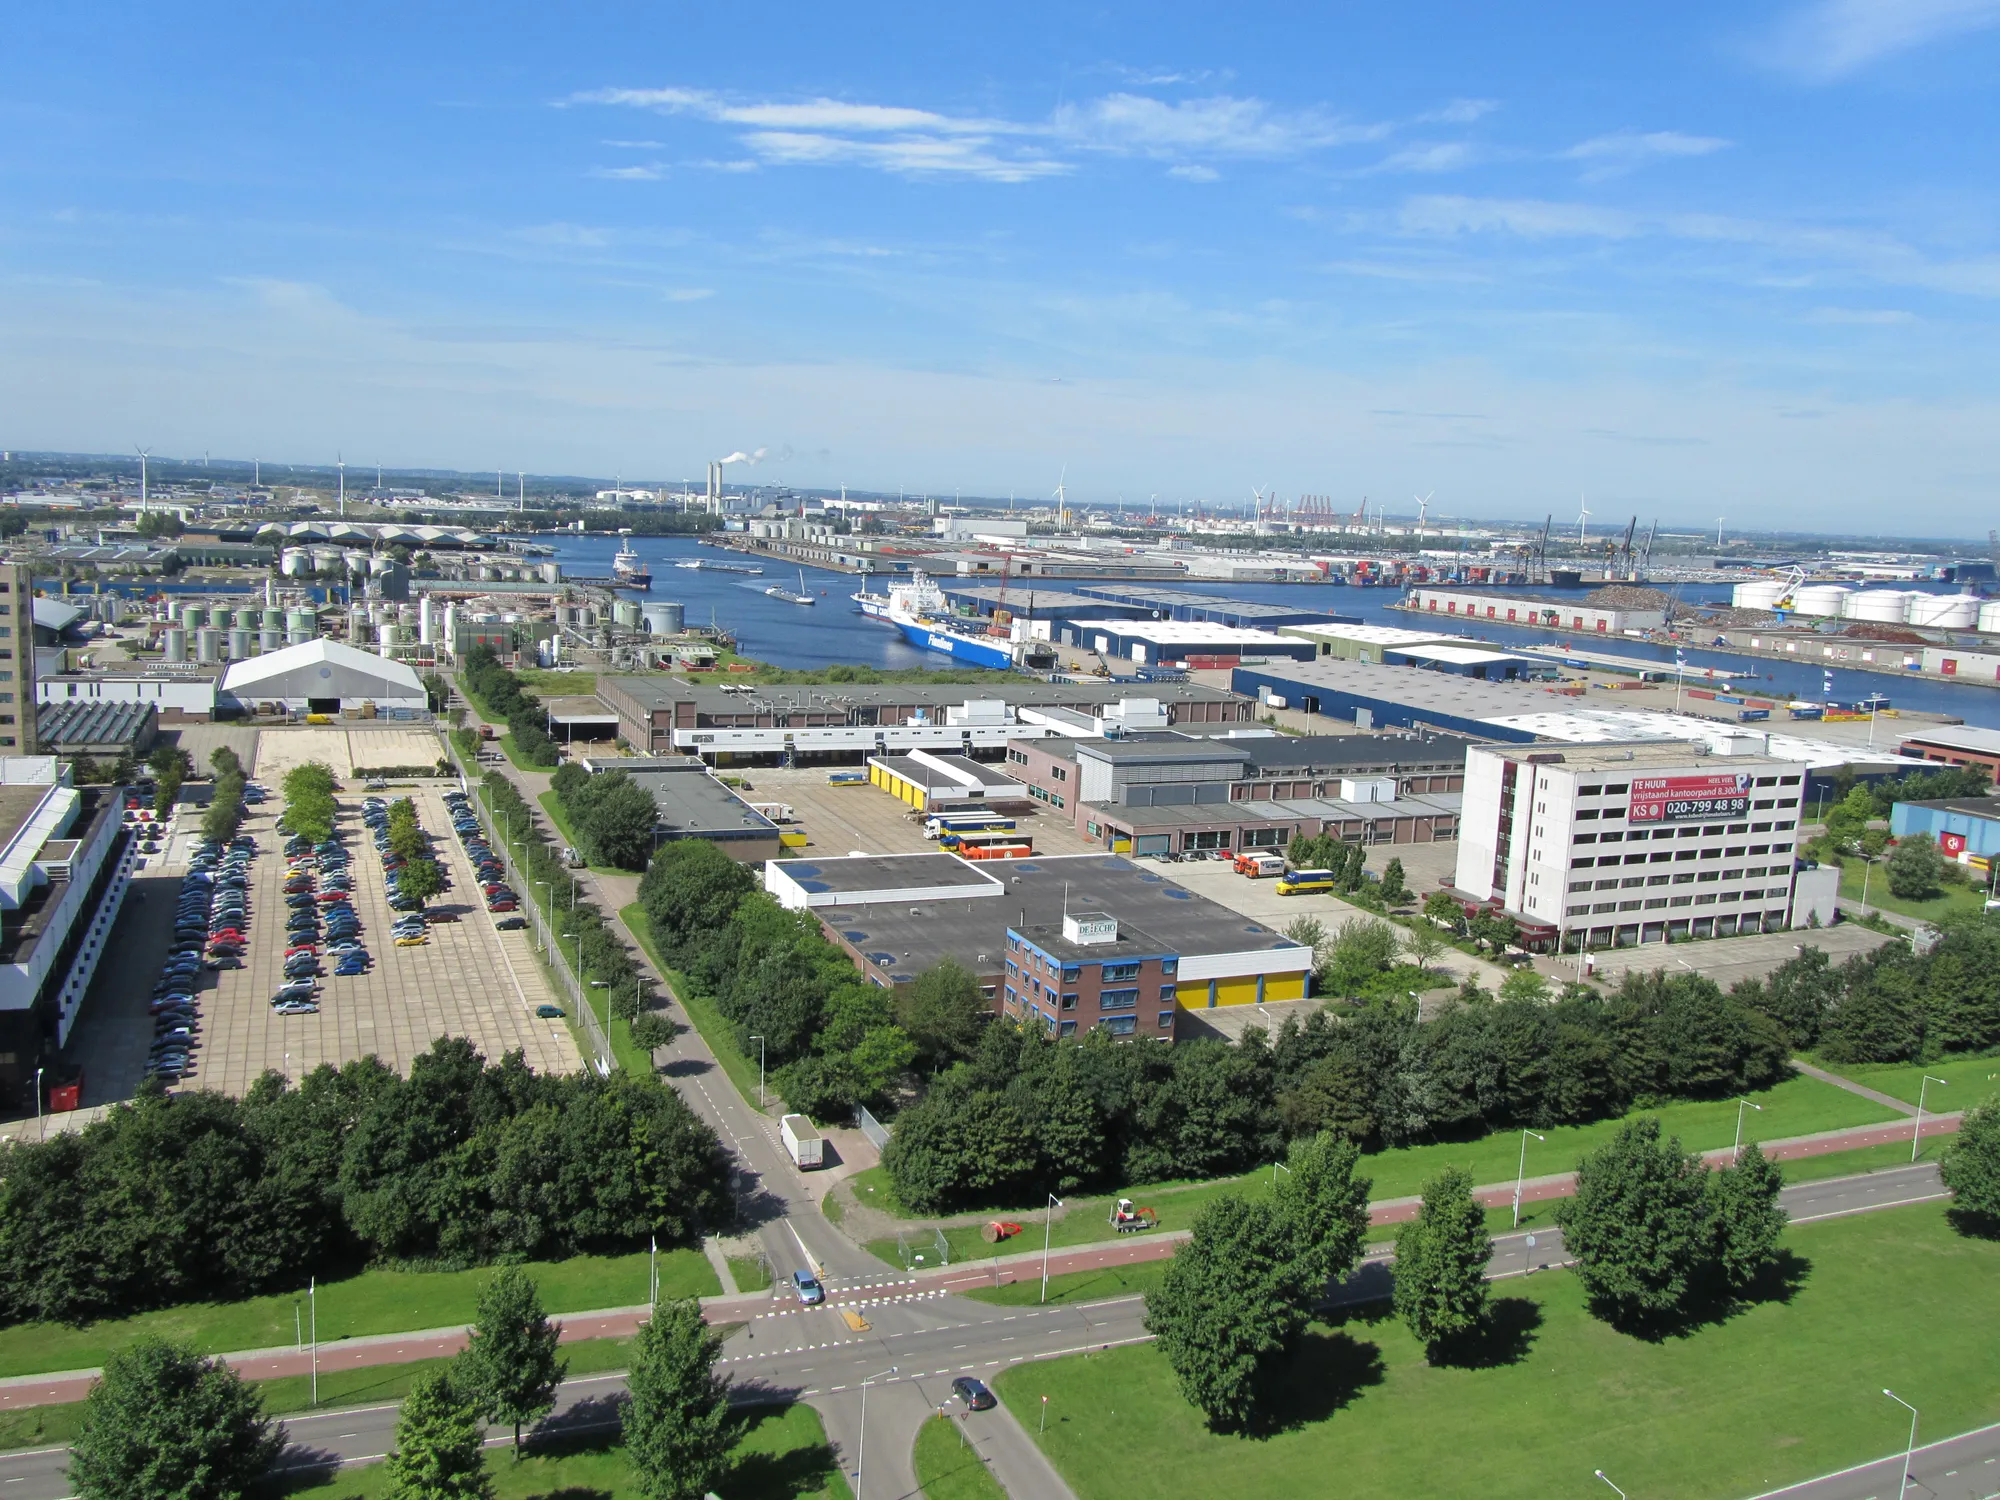 Photo showing: The Westhaven in the western harbour area of Amsterdam. Photo taken from the 18th floor of the Elsevier building on Radarweg.